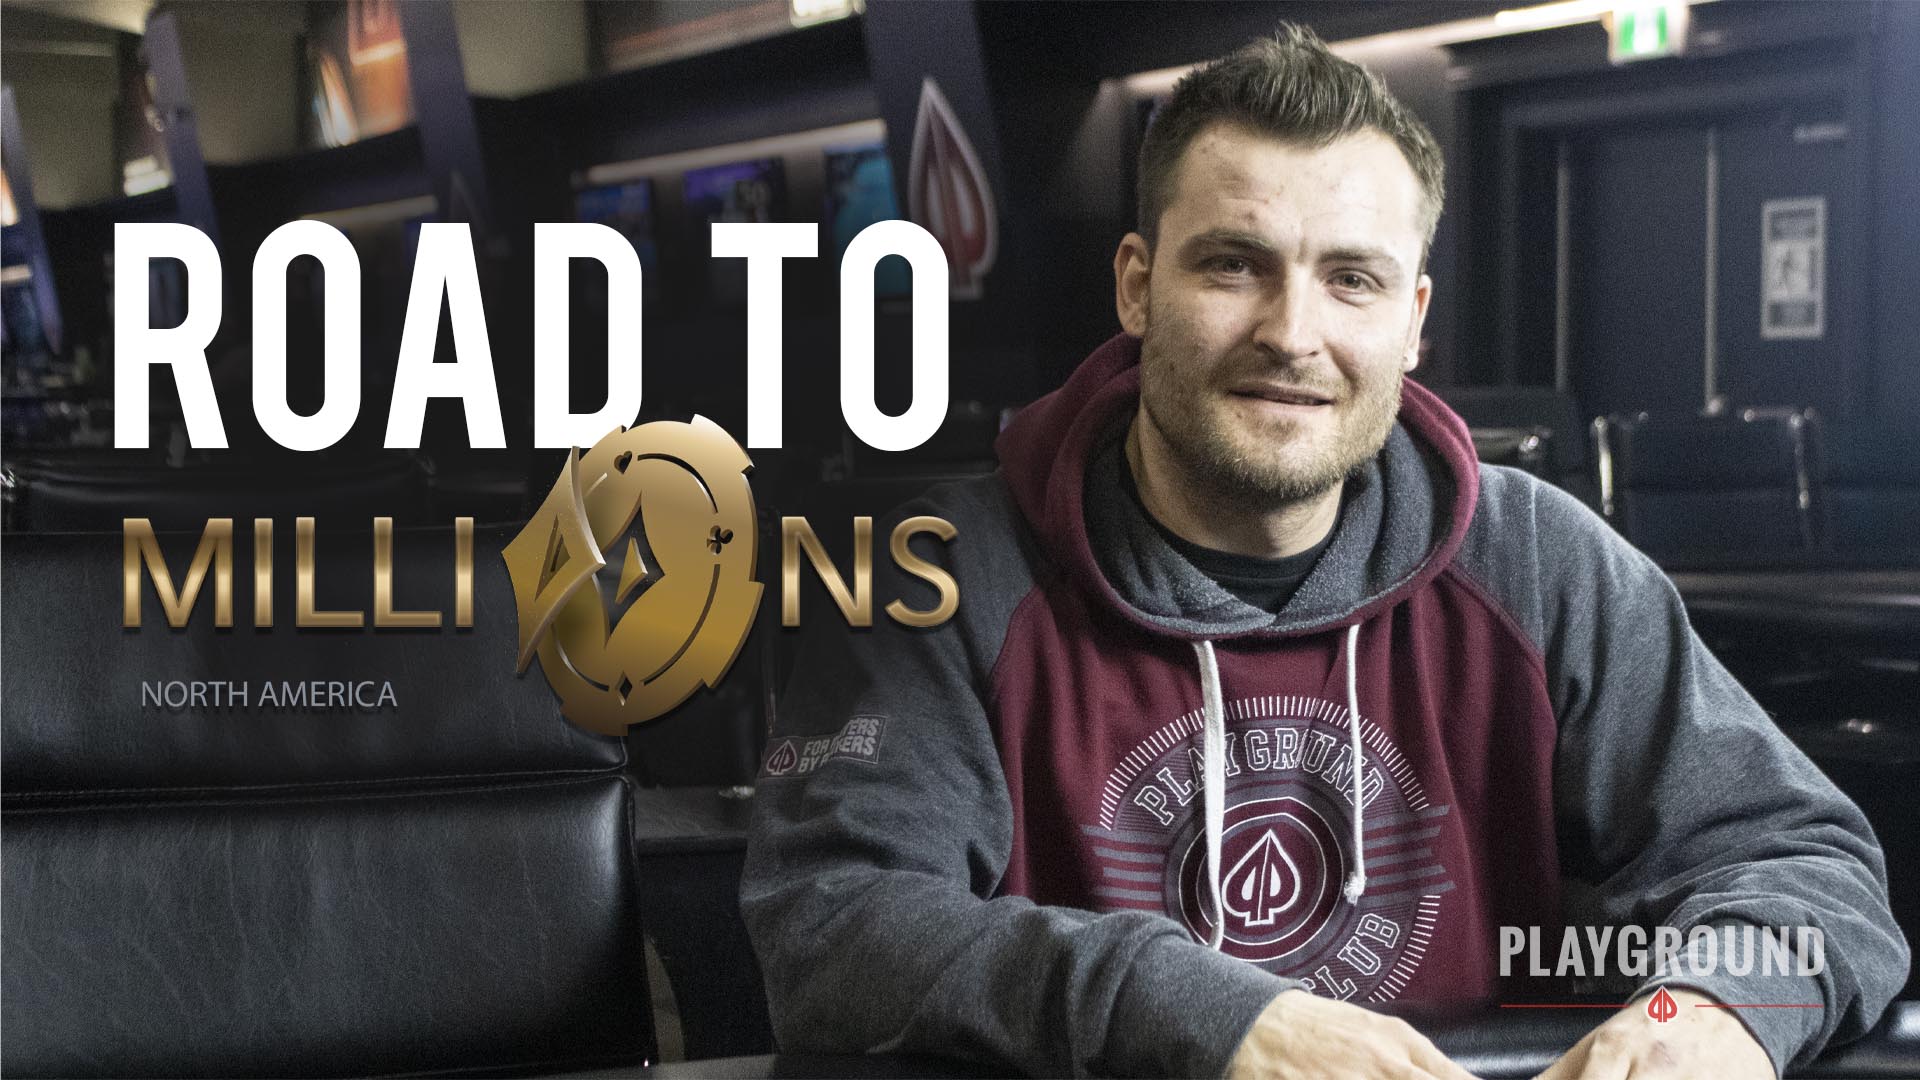 Road to MILLIONS – Episode 3